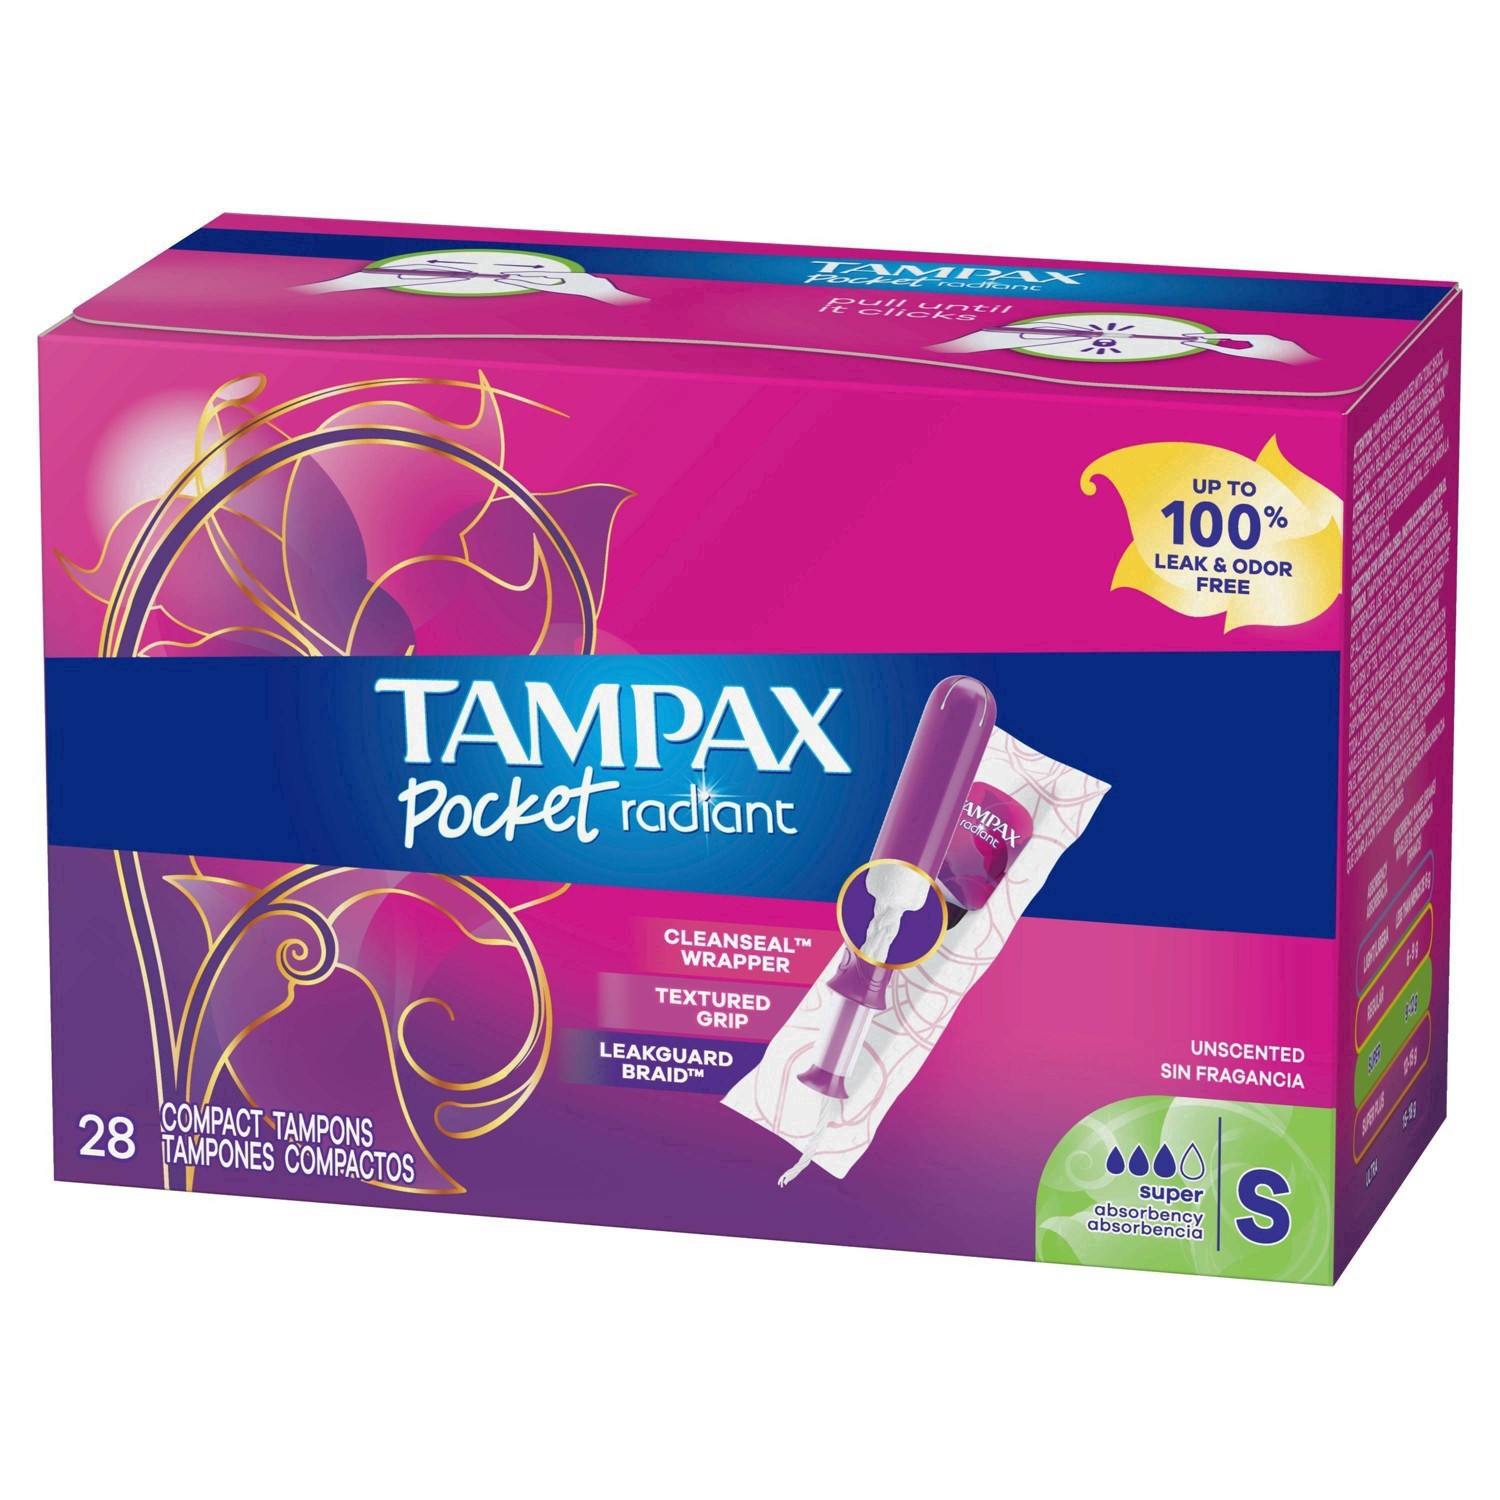 slide 8 of 94, Tampax Pocket Radiant Compact Plastic Tampons, With LeakGuard Braid, Super Absorbency, Unscented, 28 Count, 28 ct